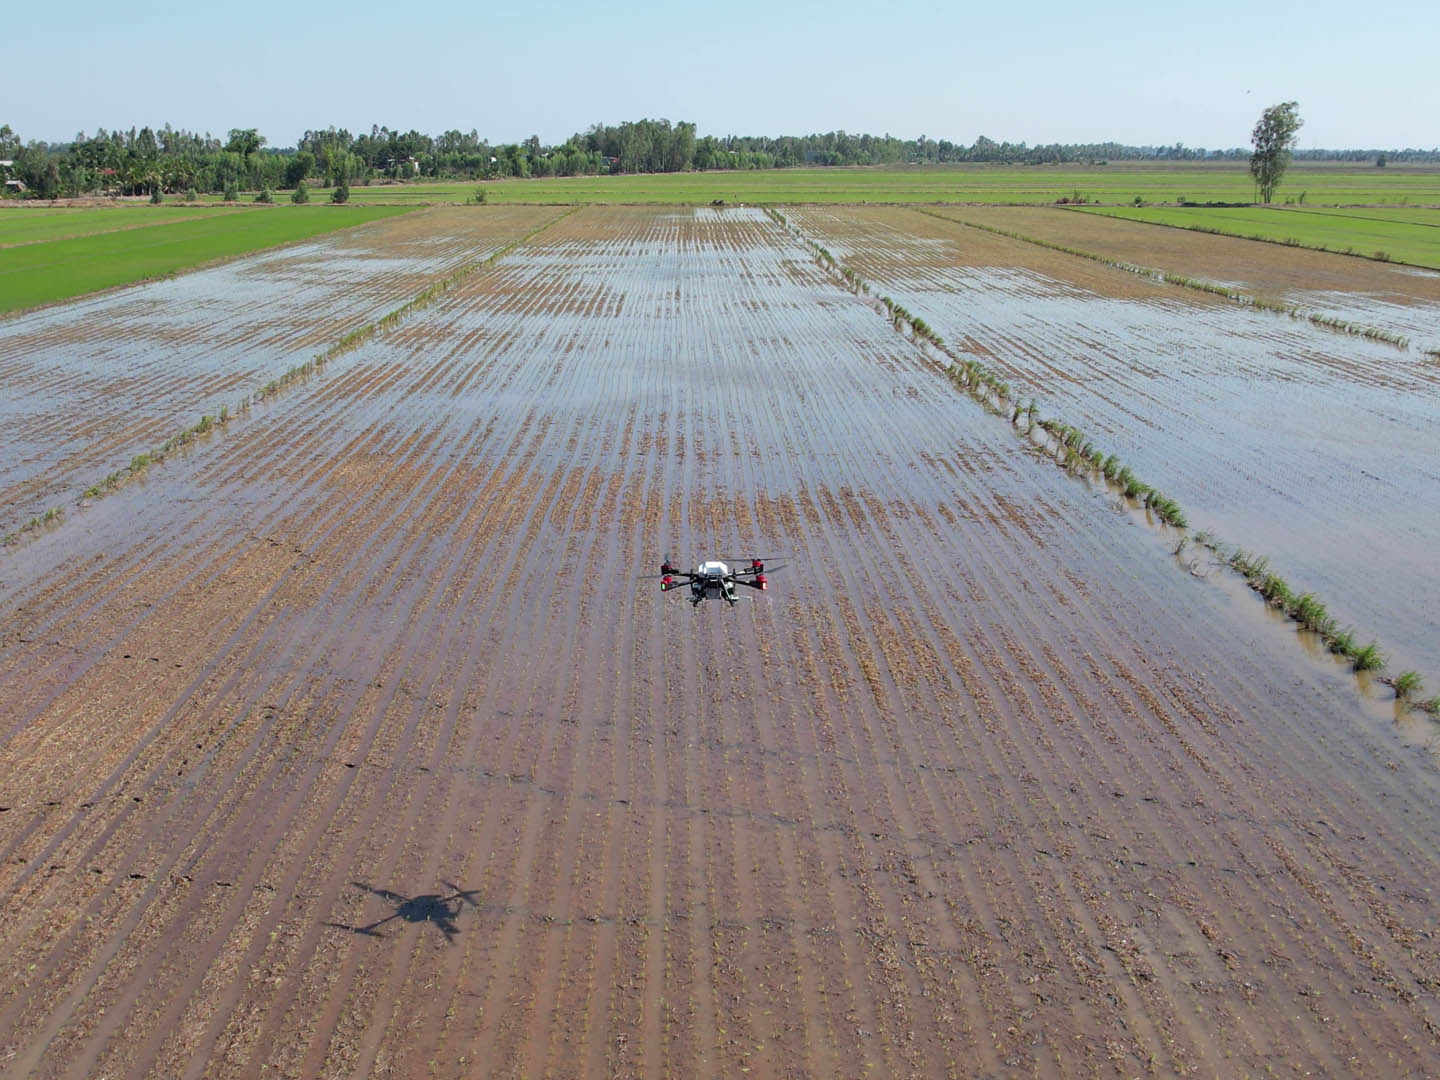 The rice field was cared by XAG agricultural drone with fertilizers spread from the air